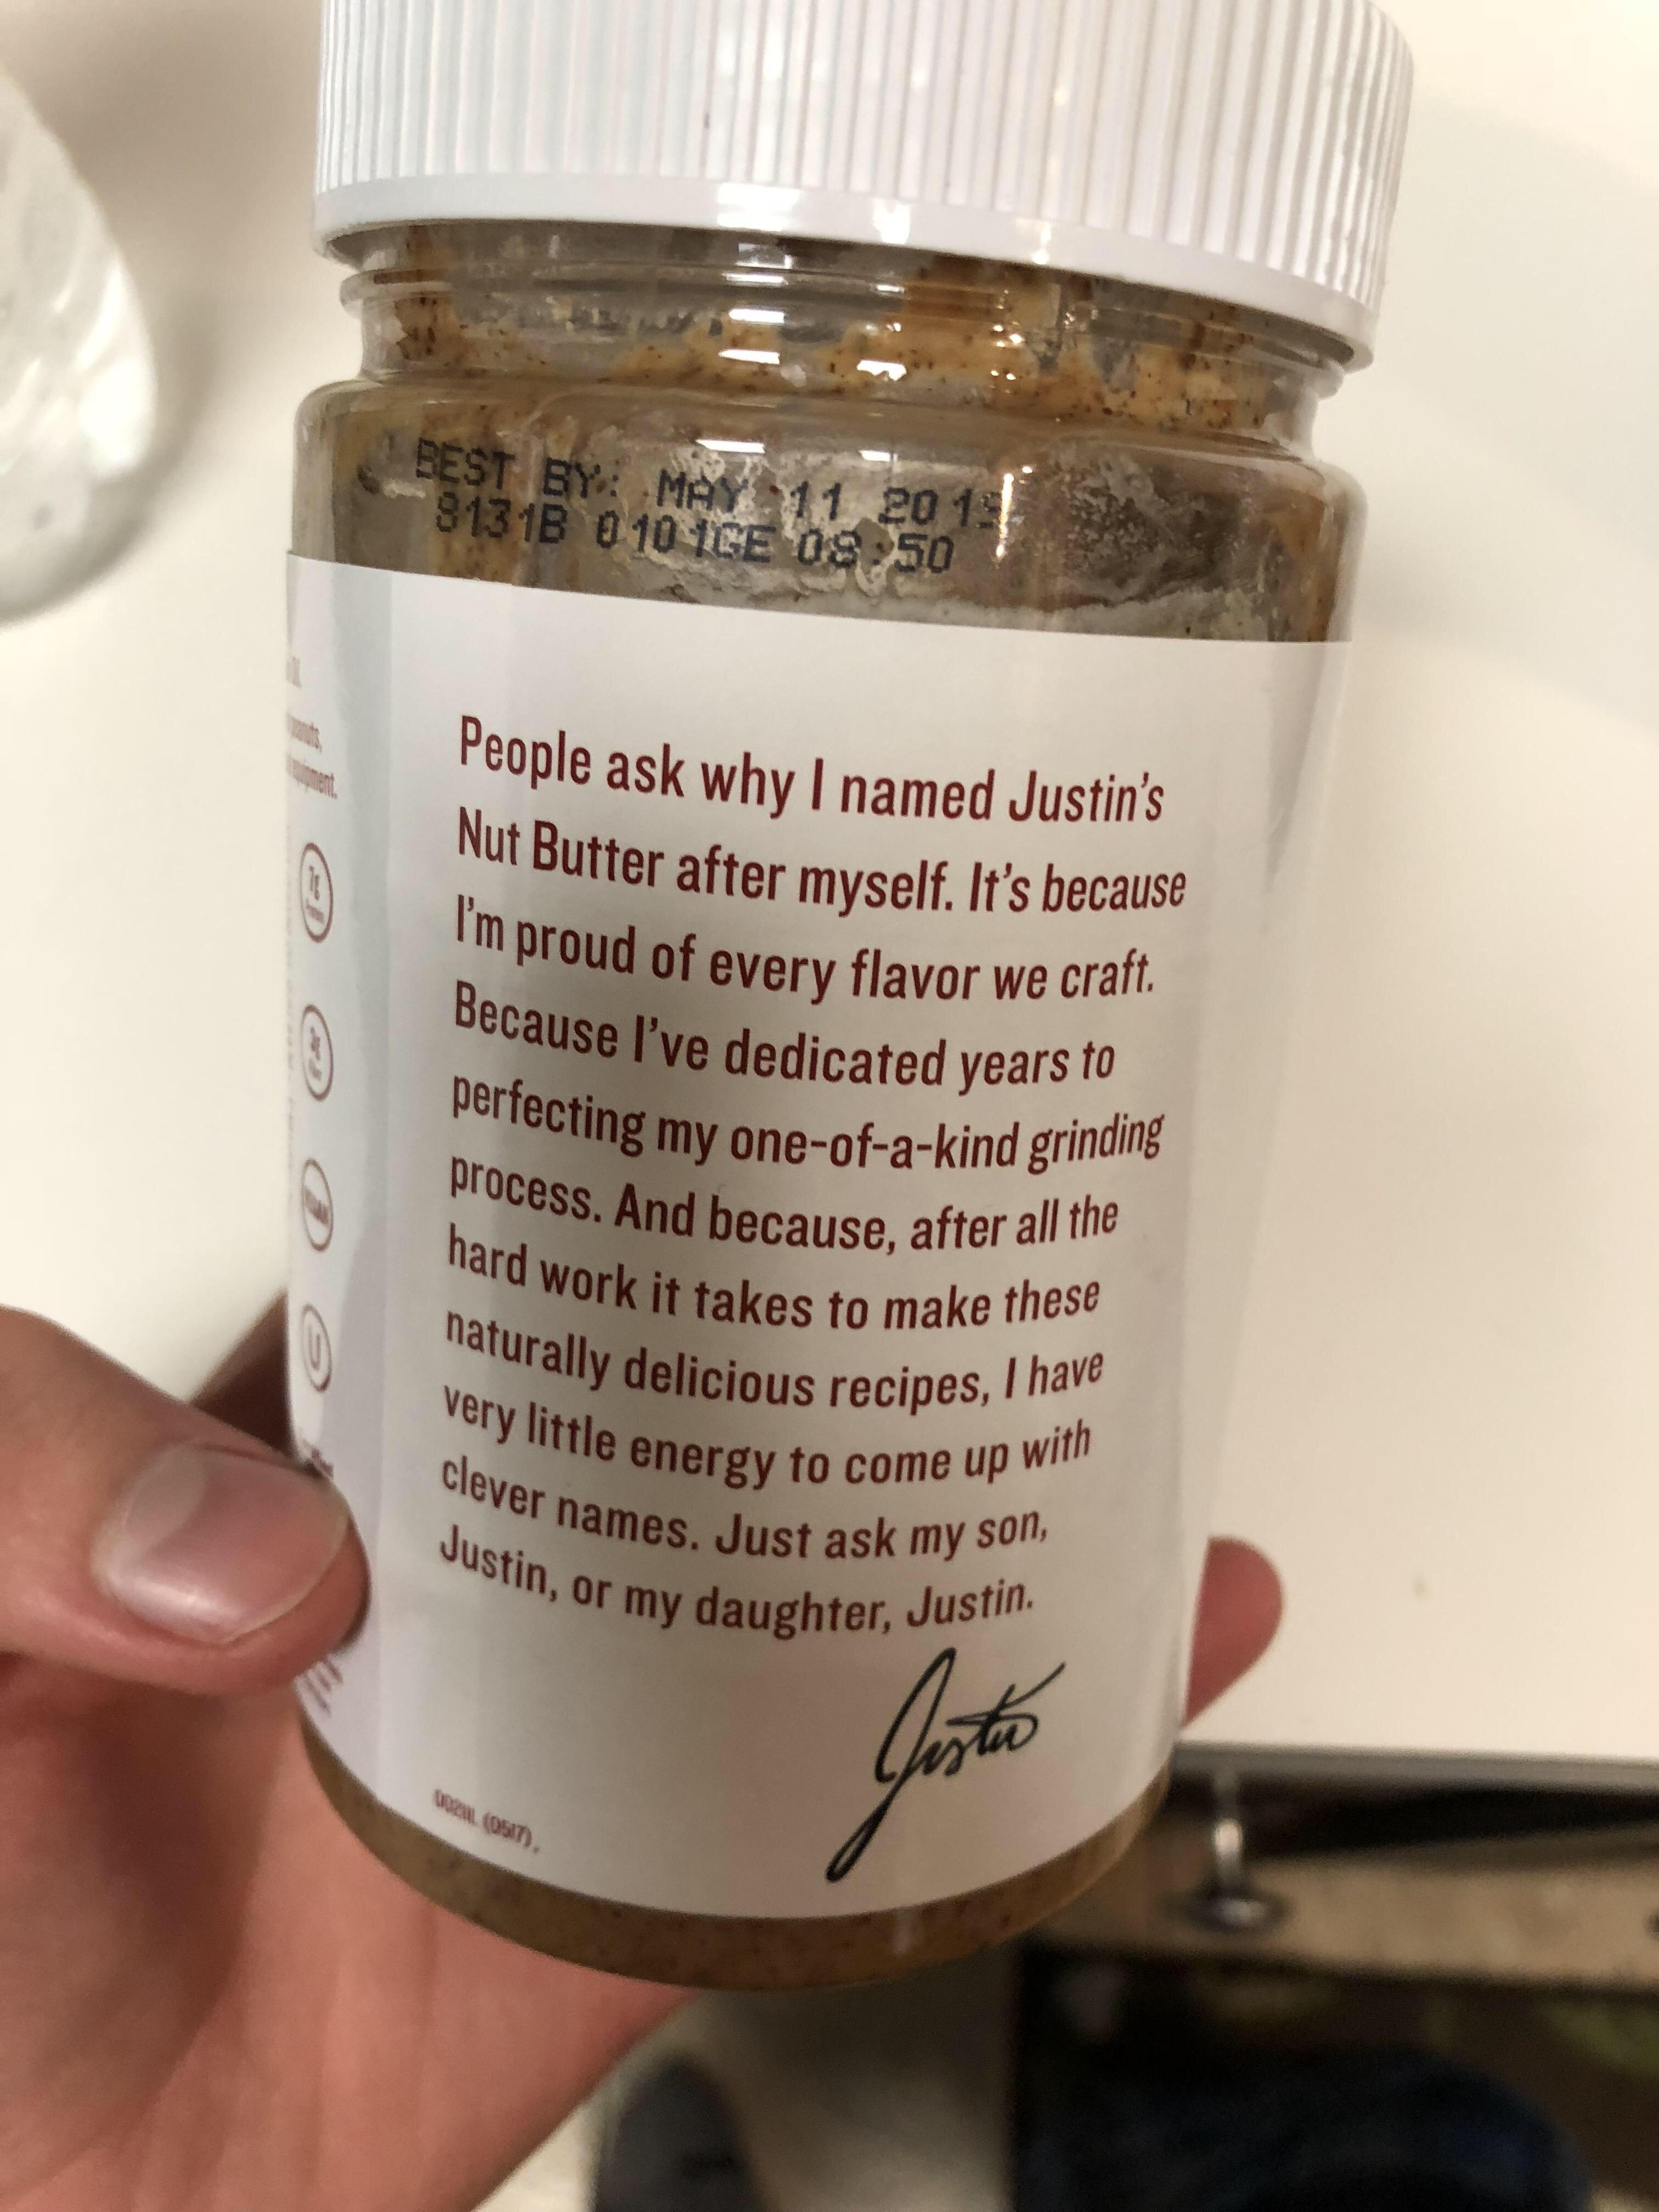 Justin's Nut Butter is the finest in the land.